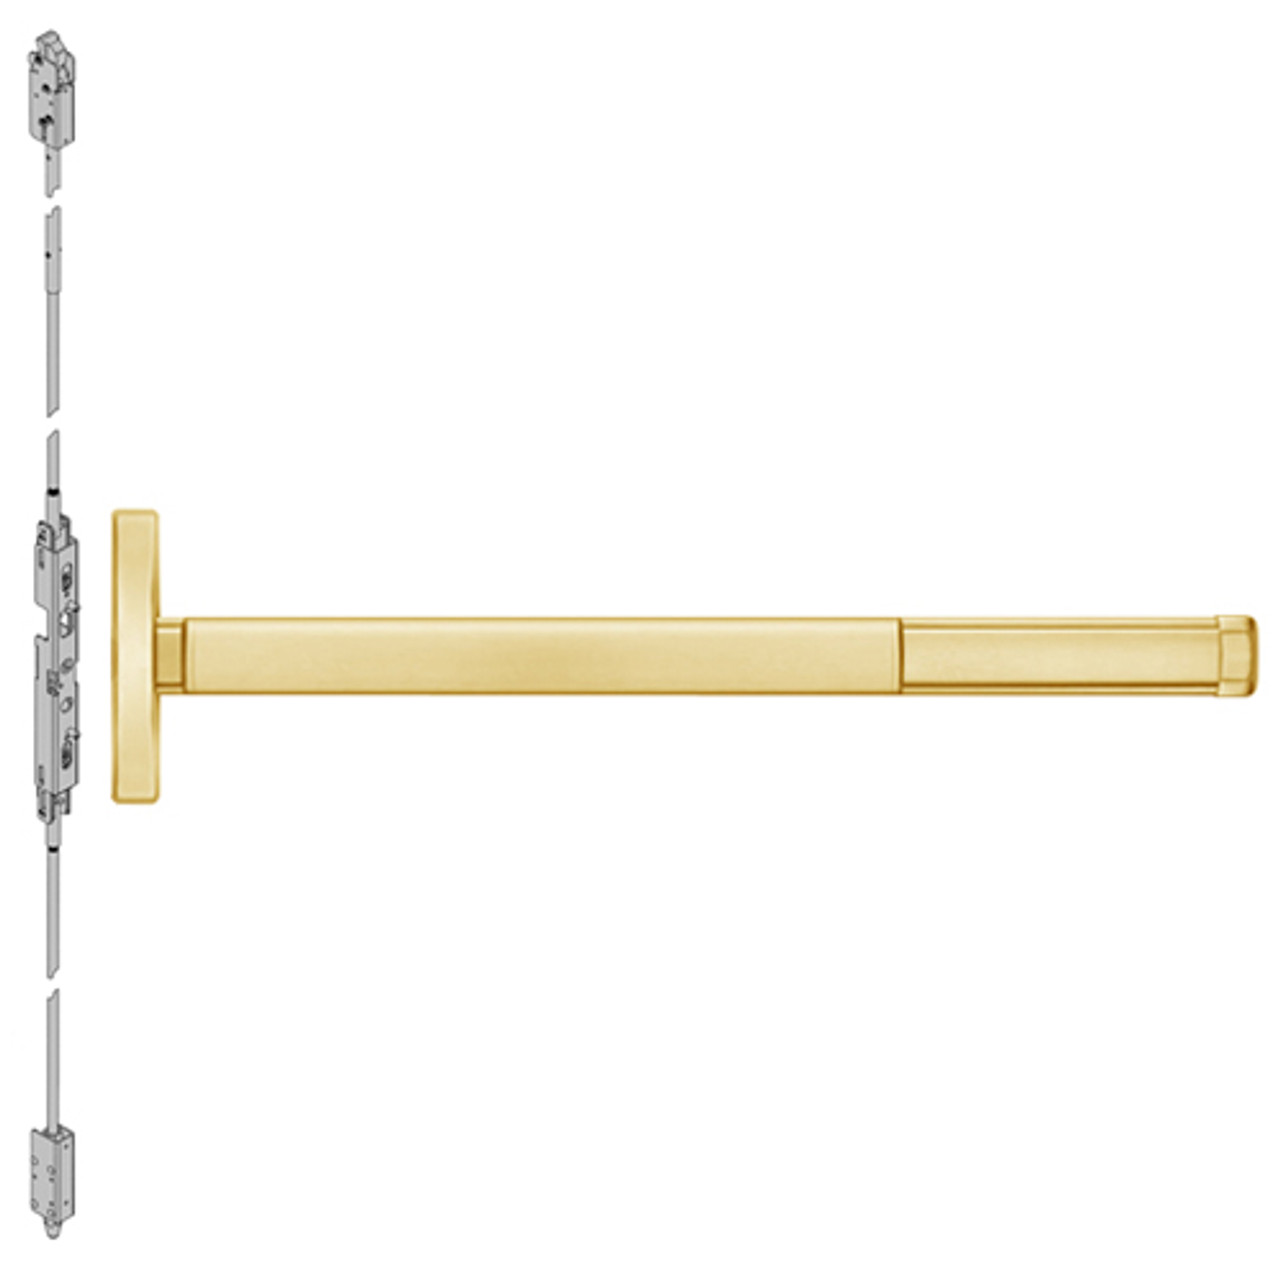 2614CD-605-48 PHI 2600 Series Non Fire Rated Concealed Vertical Rod Exit Device Prepped for Lever Always Active with Cylinder Dogging in Bright Brass Finish